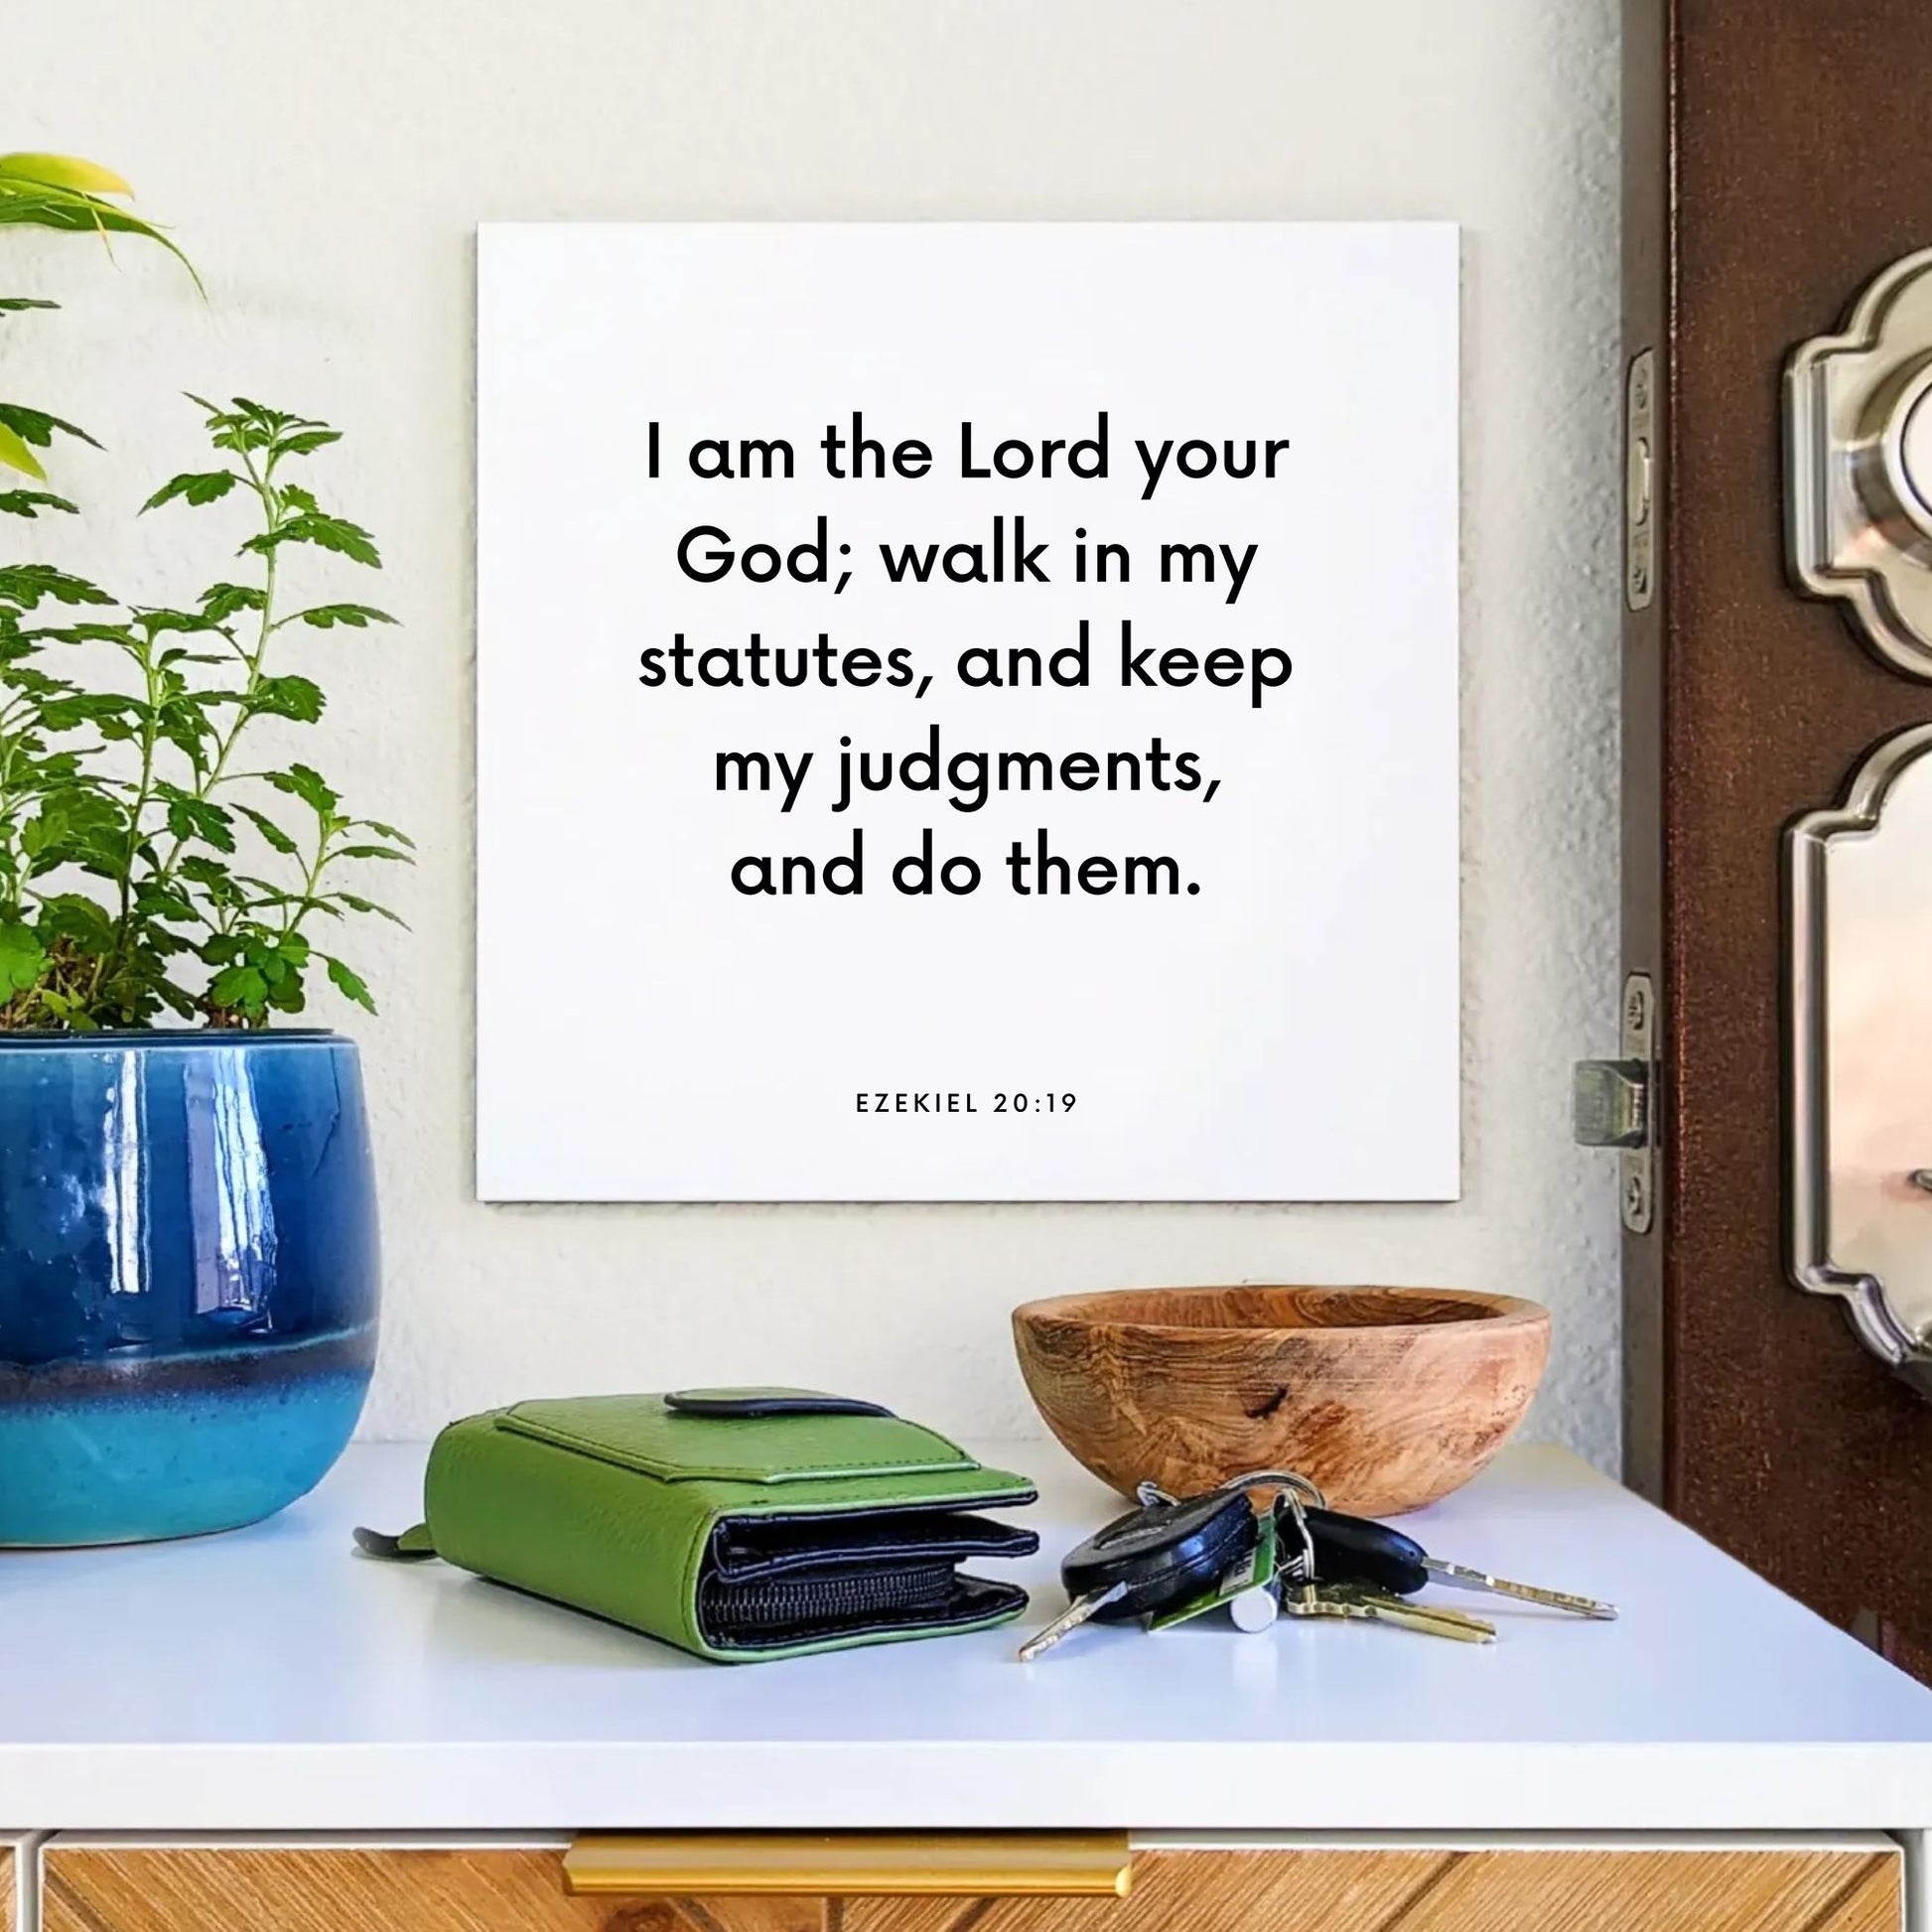 Entryway mouting of the scripture tile for Ezekiel 20:19 - "I am the Lord your God; walk in my statutes"